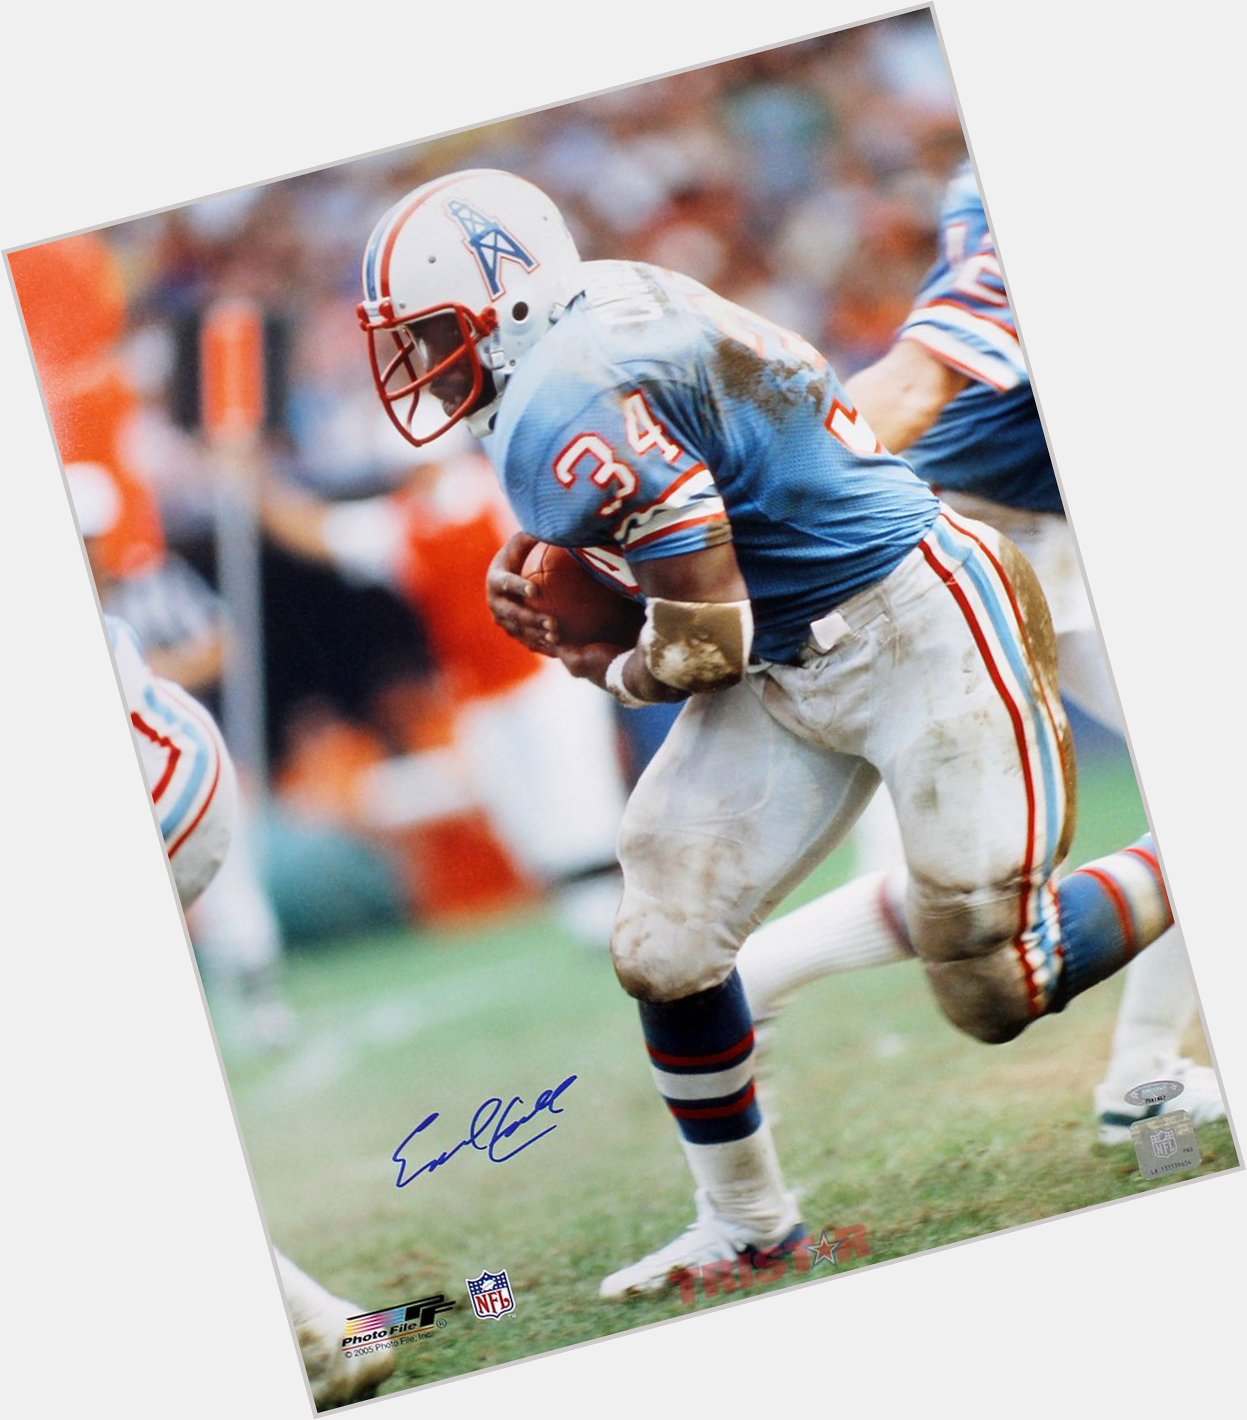 Happy Birthday to Earl Campbell, who turns 62 today! 